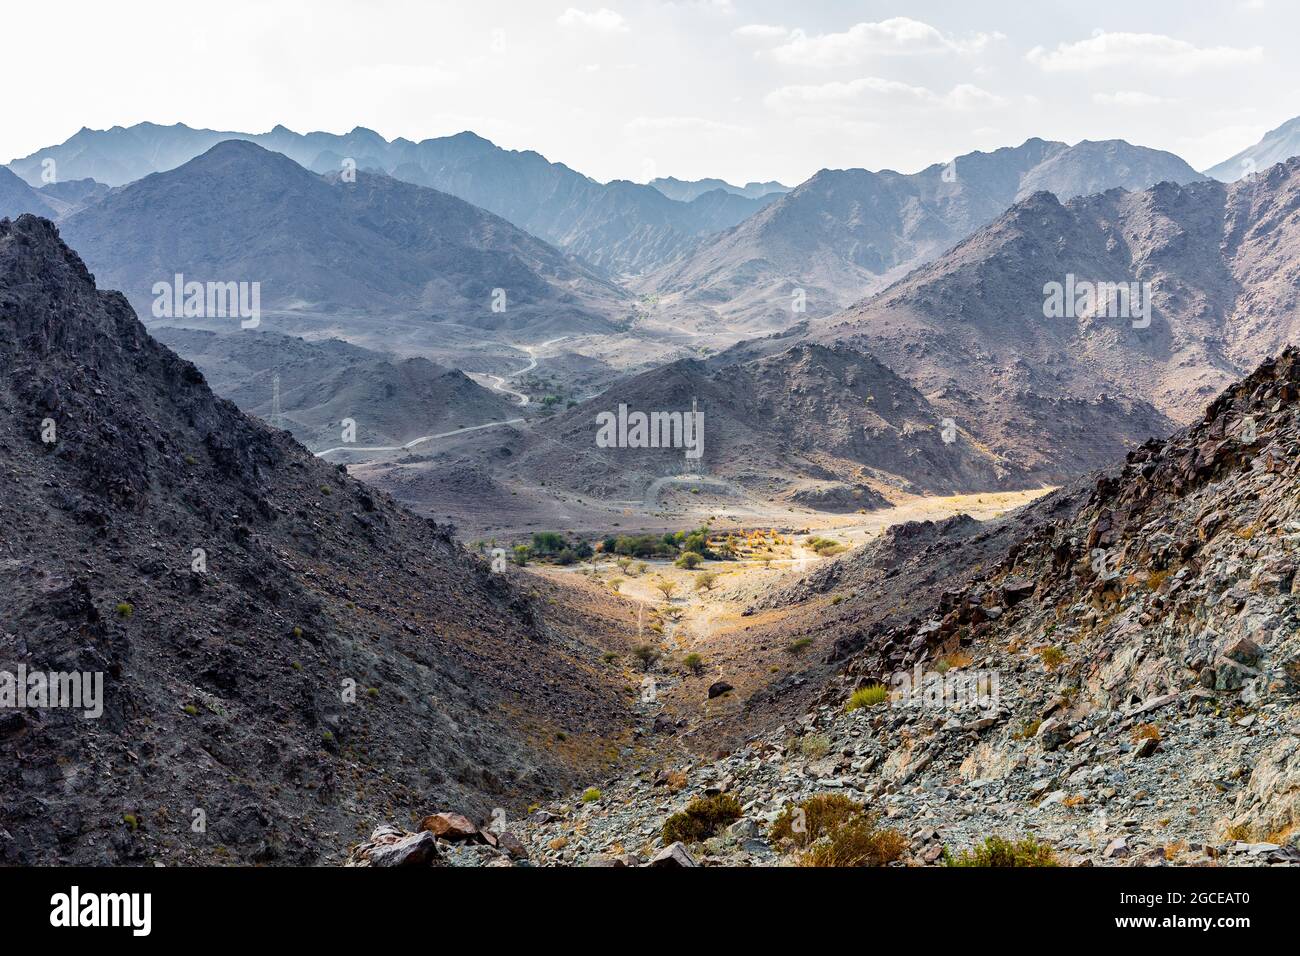 Hajar Mountains and Wadi Ghargur landscape view with transmission towers seen from Copper Hike Summit, barren, rocky mountains in Hatta, UAE. Stock Photo